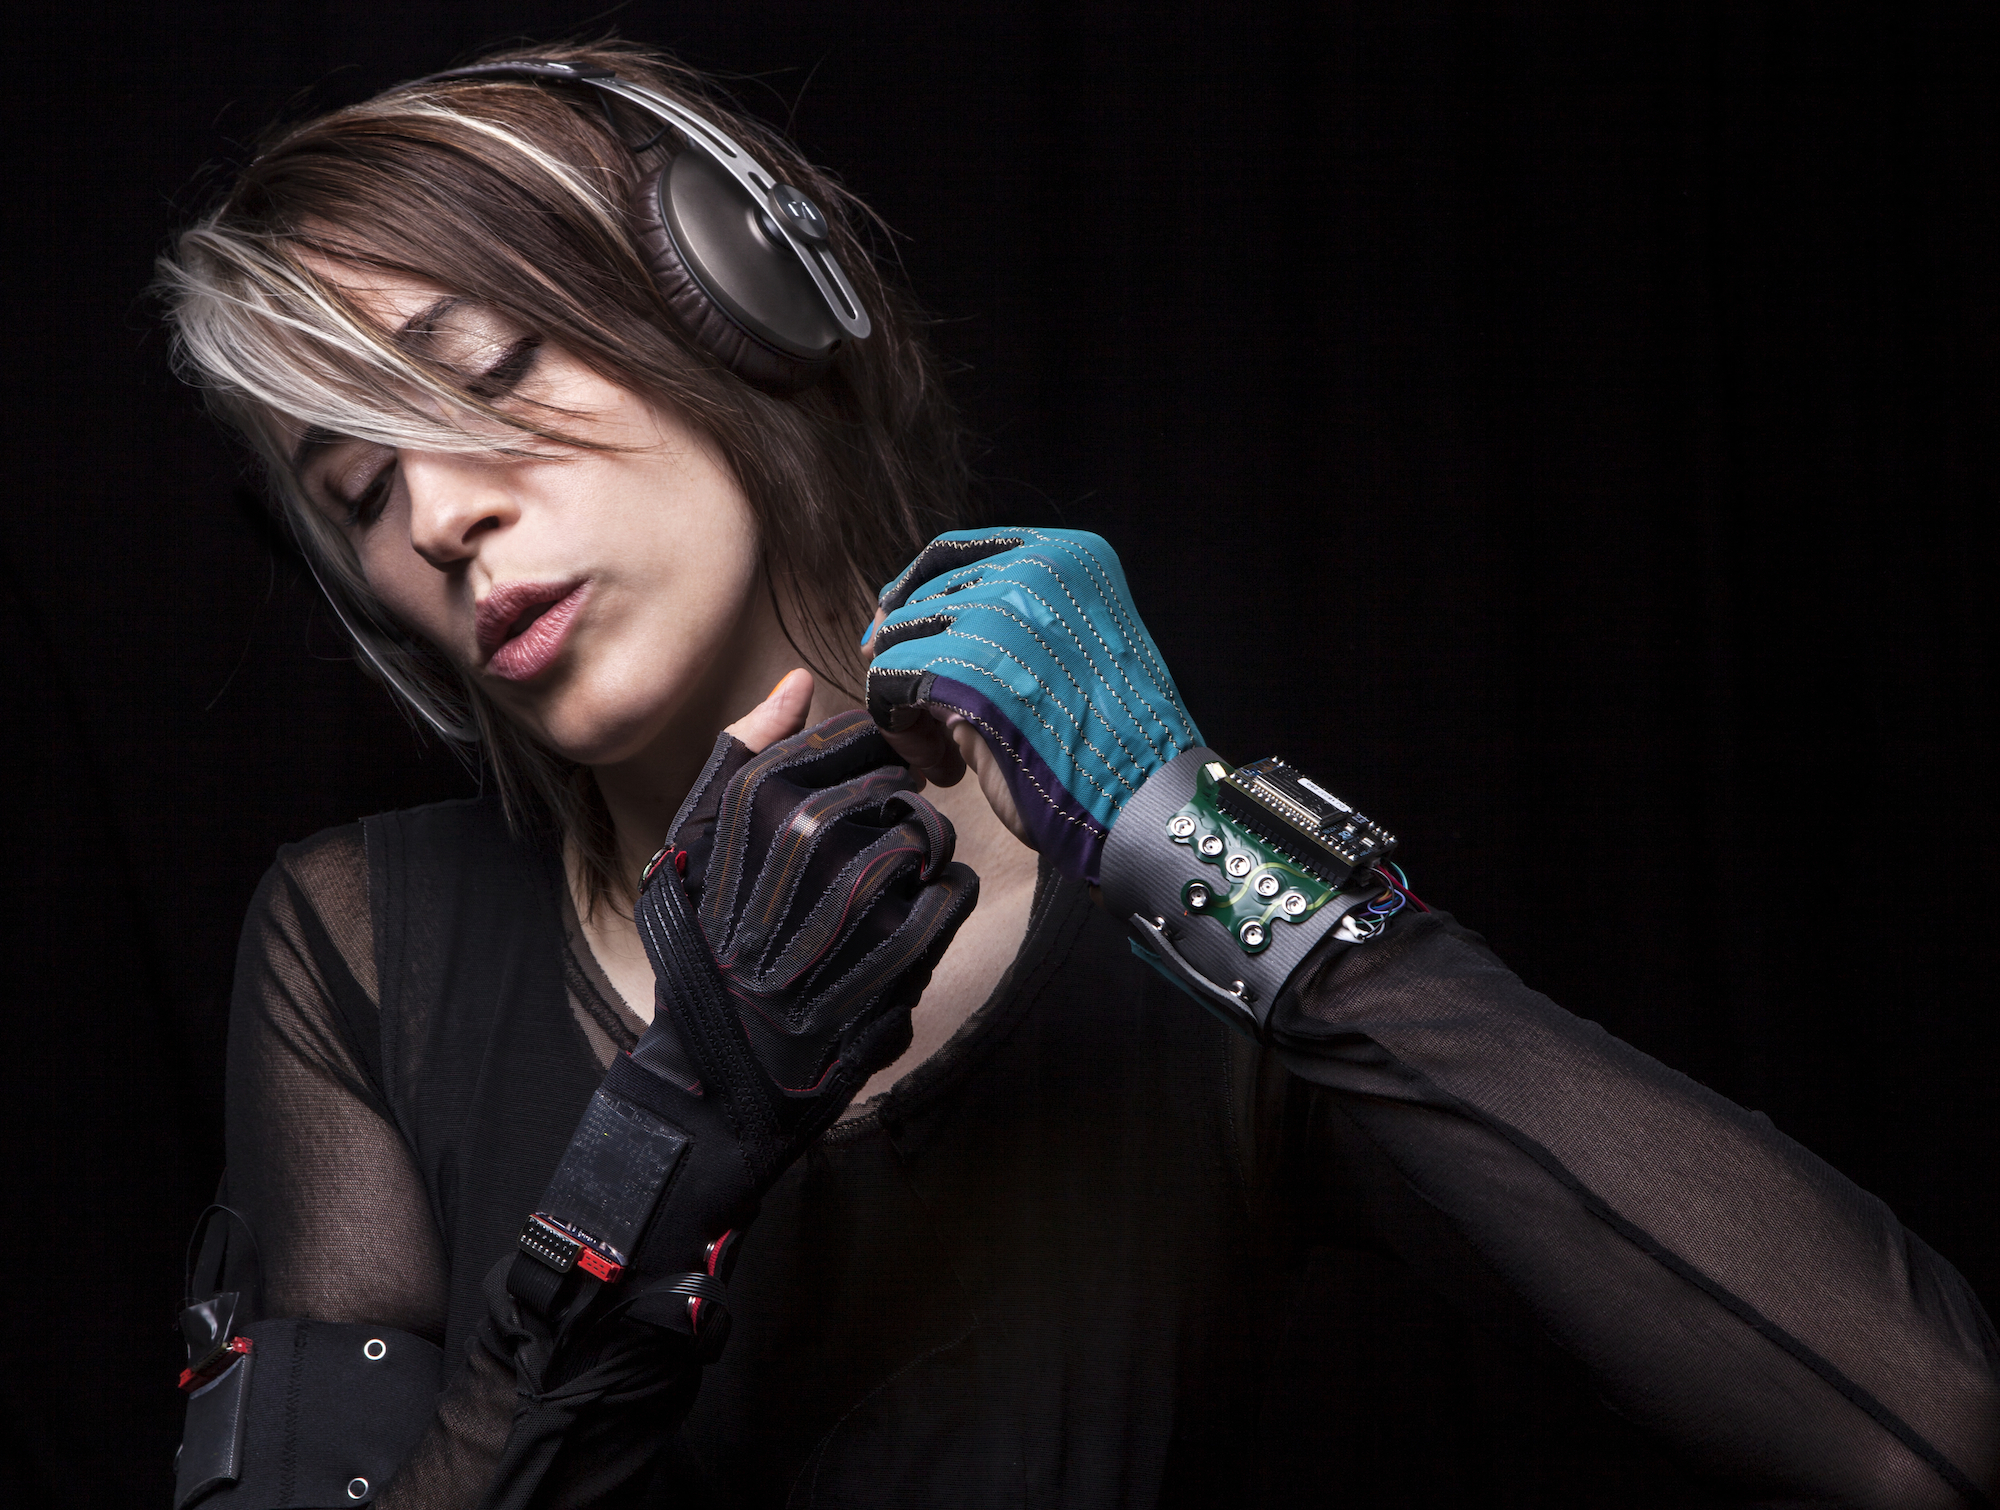 Imogen Heap Innovates Music Production With Wearable Technology Project